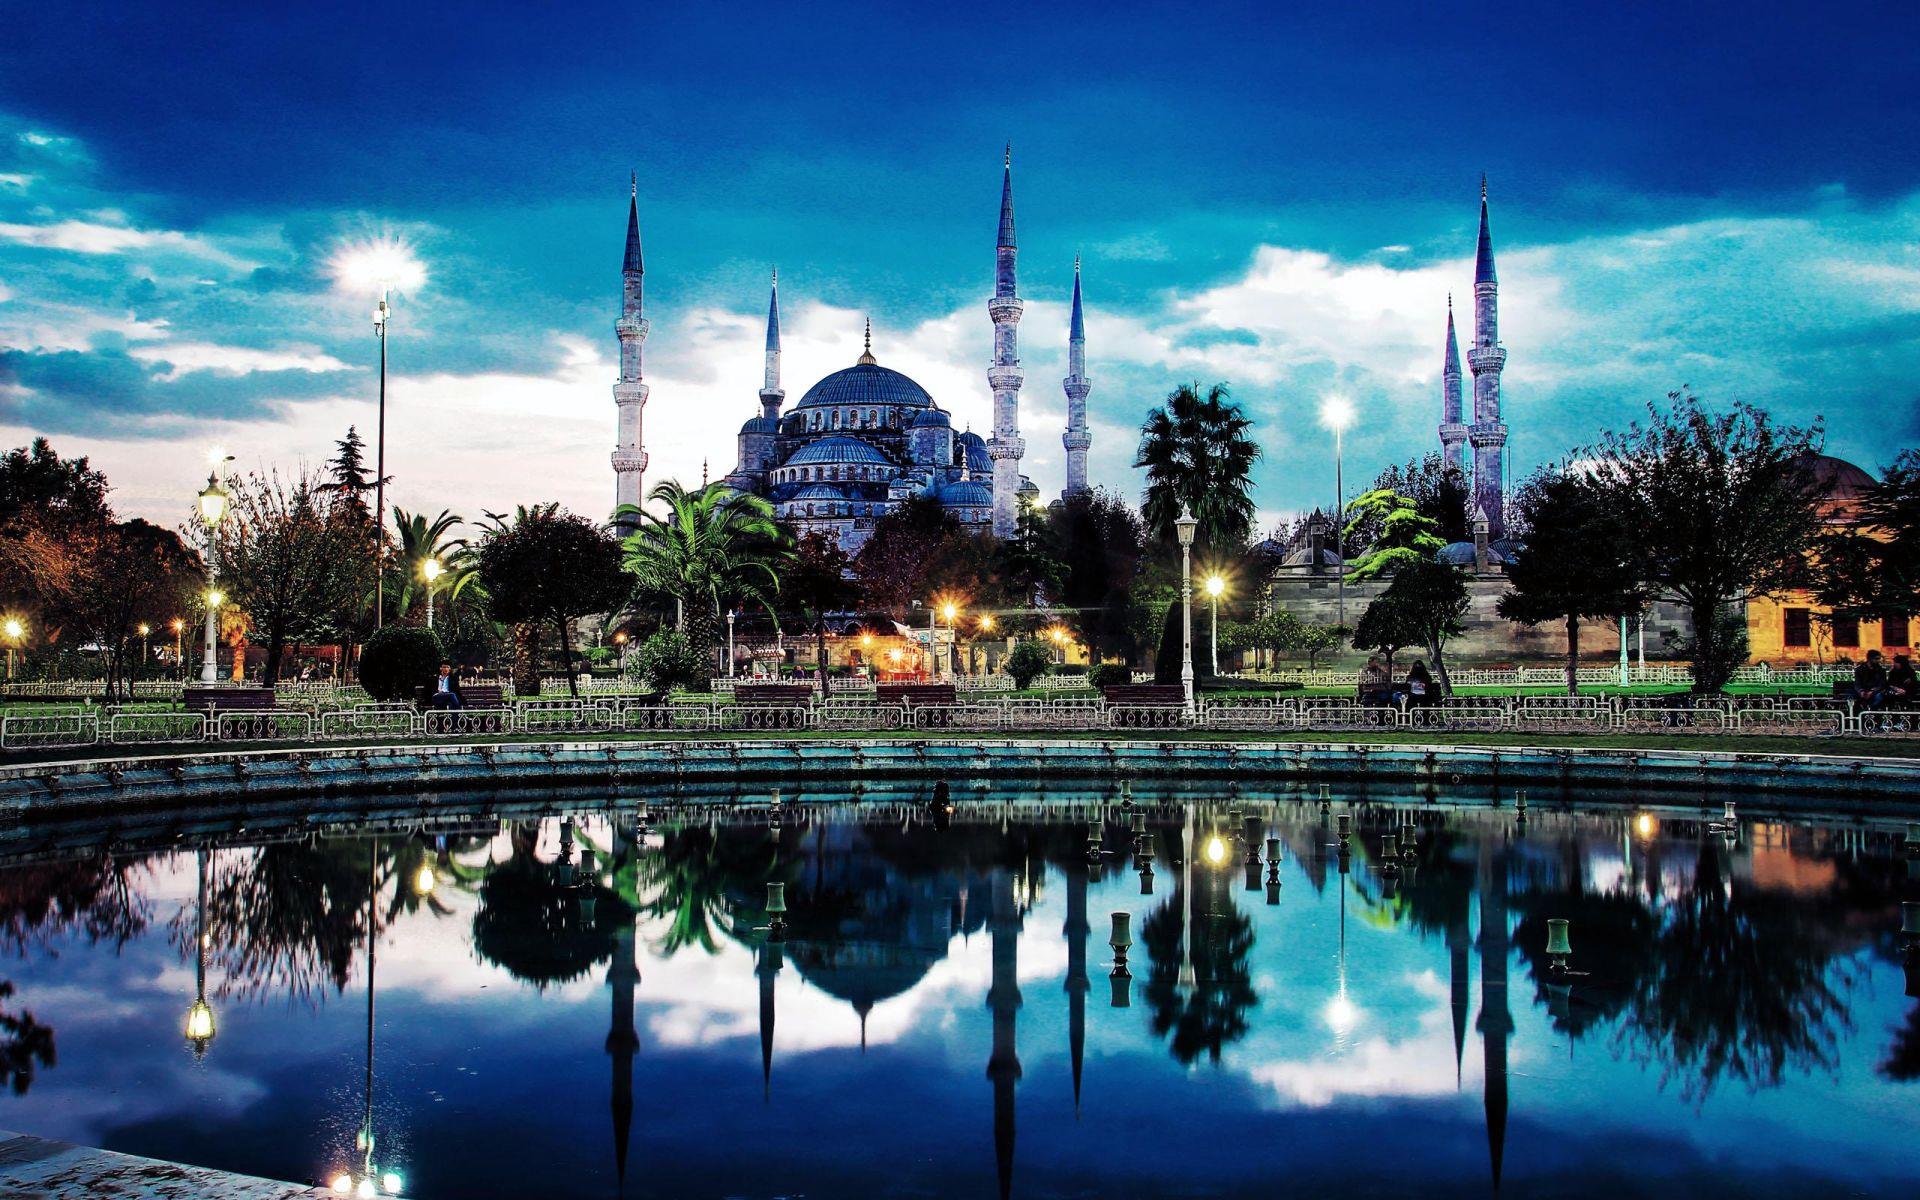 Blue Mosque (called Sultanahmet Camii) ISTANBUL (Town) TURKEY